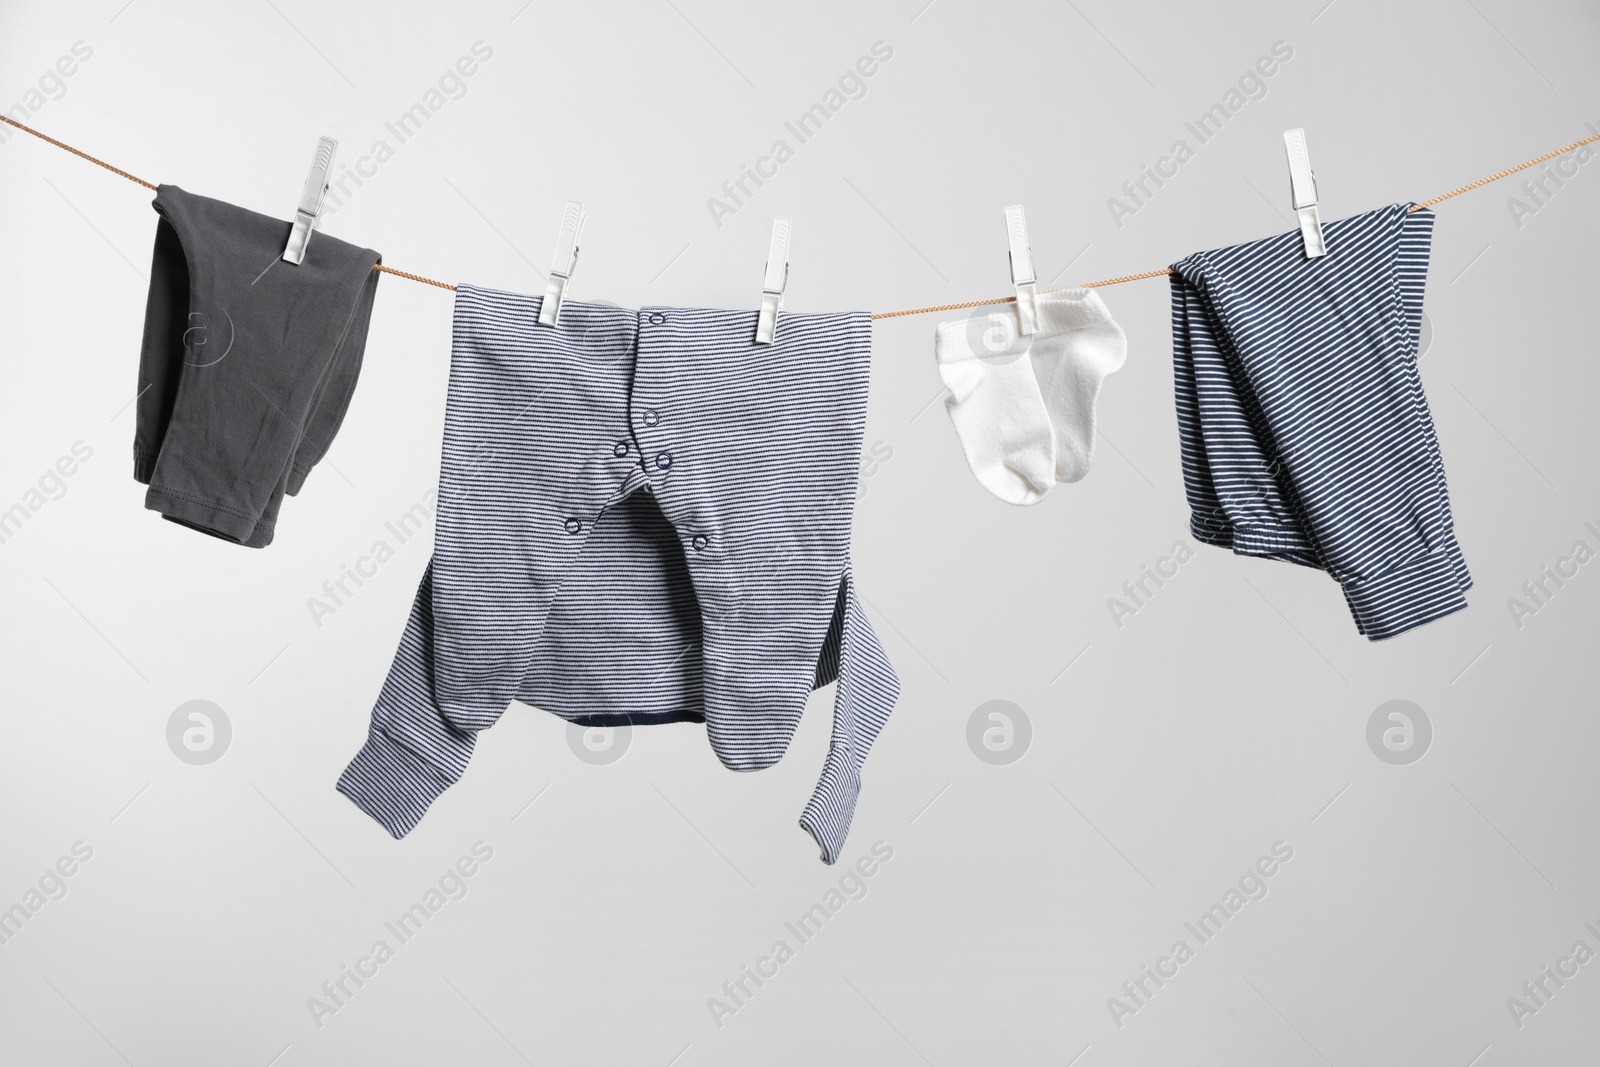 Photo of Cute baby clothes drying on washing line against white background